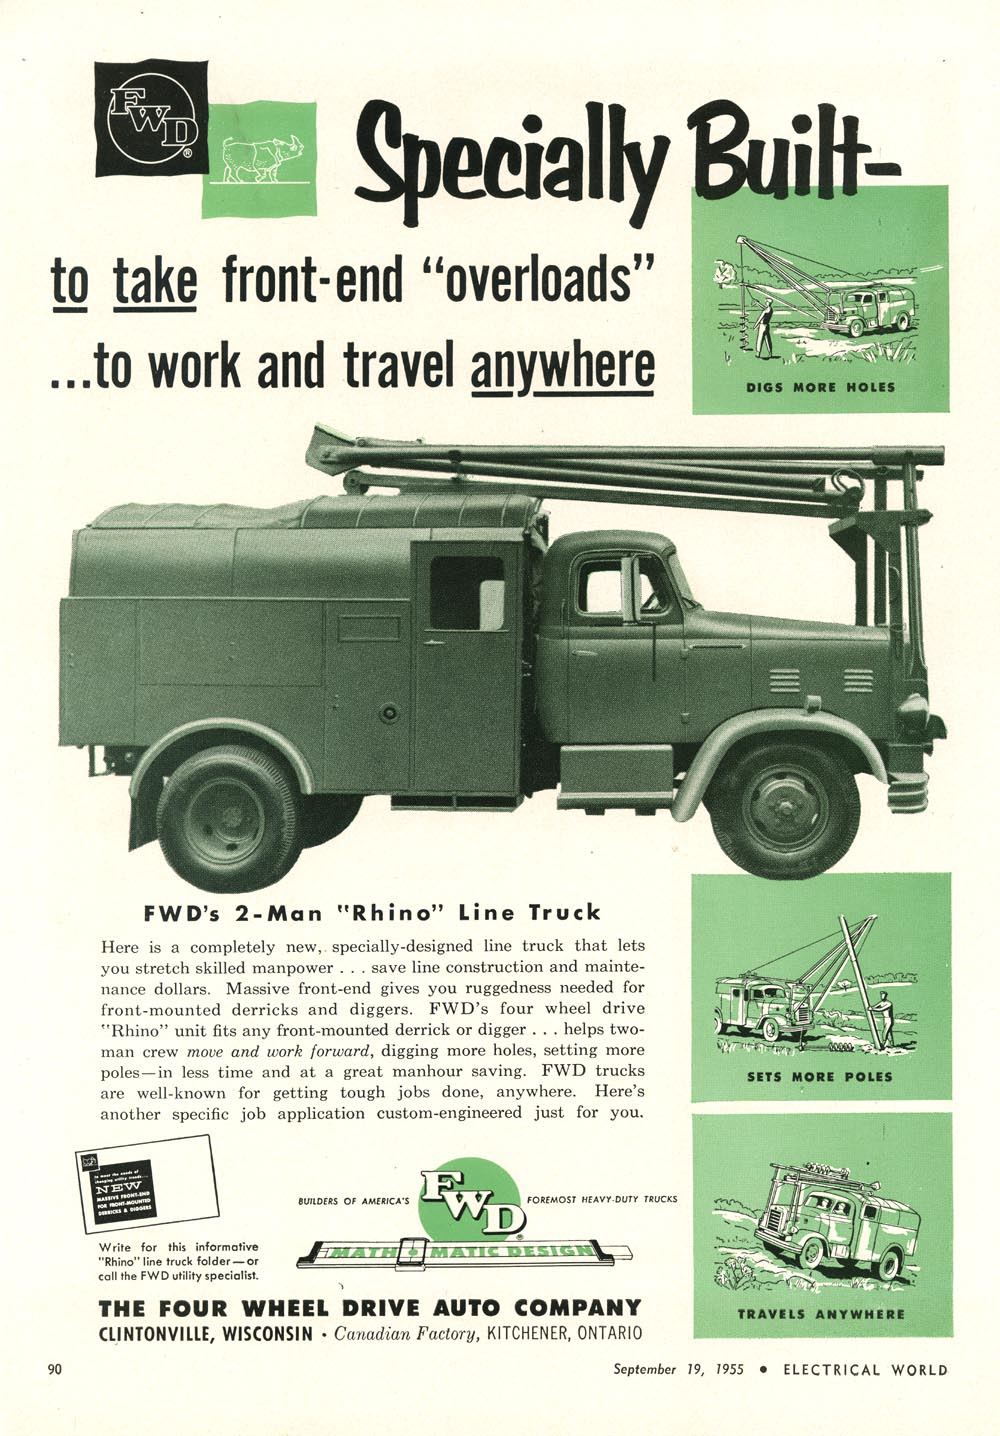 advertisement for Four Wheel Drive Auto Company two-man utility line truck